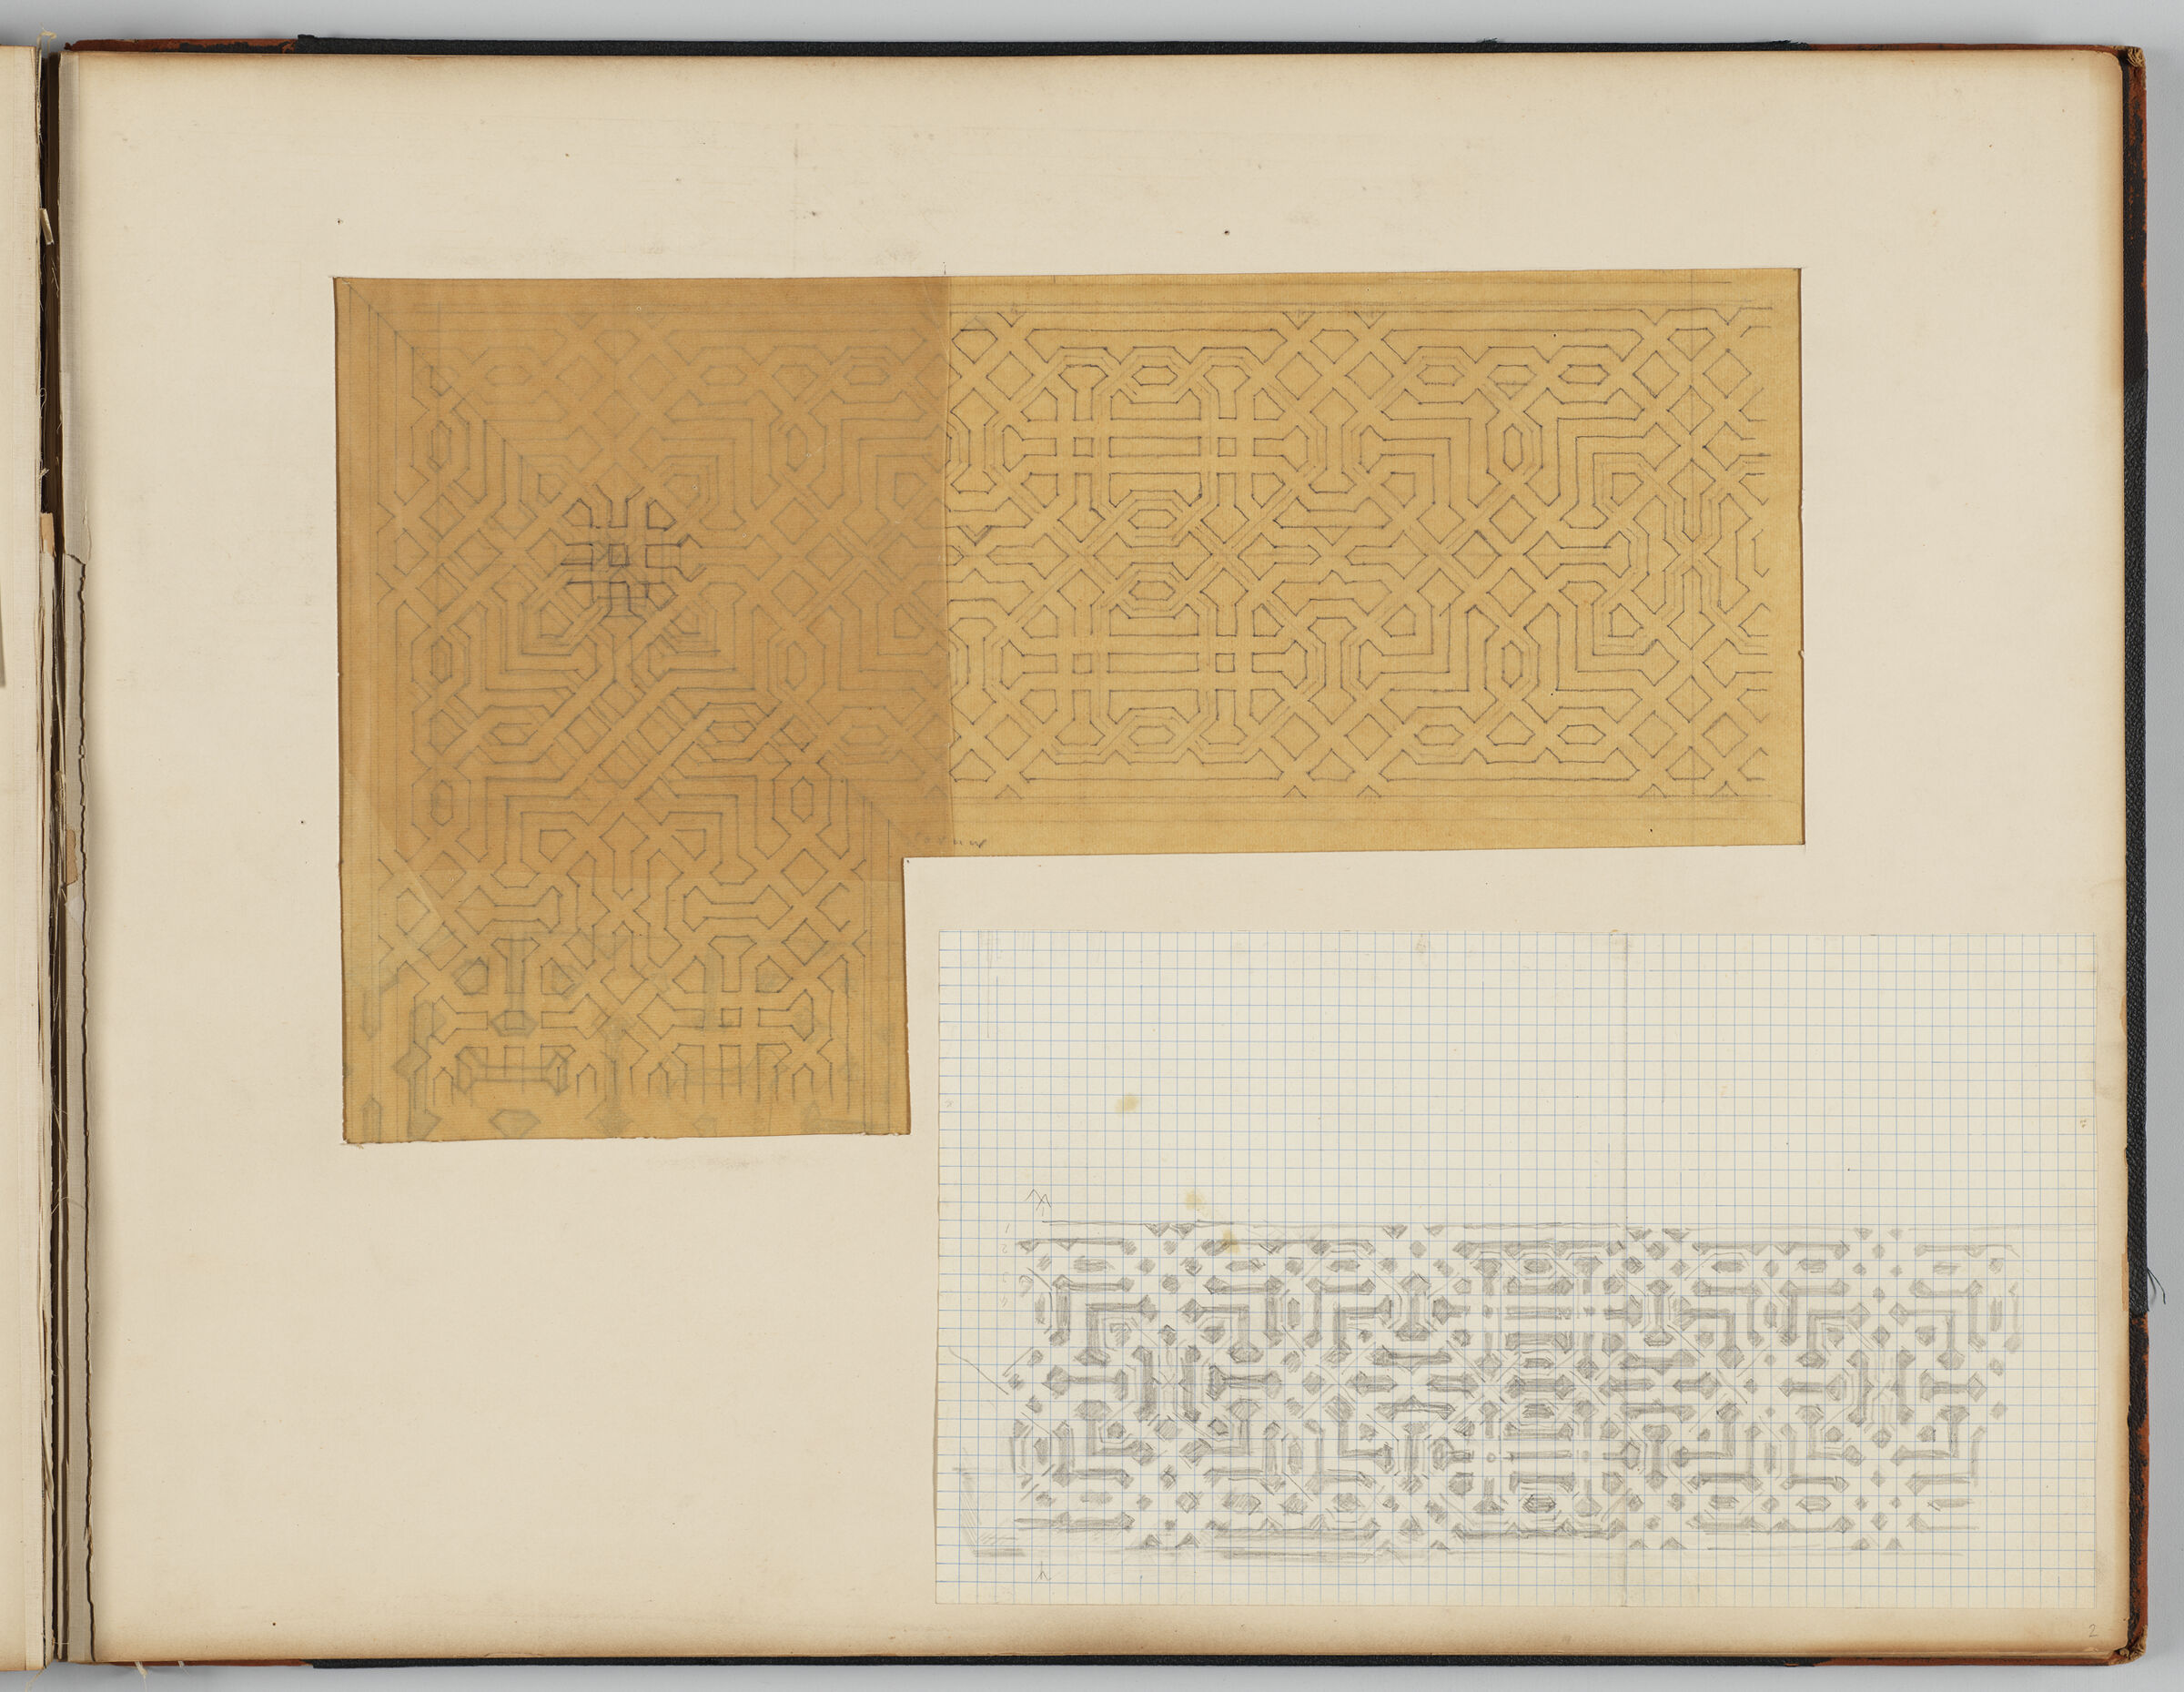 Album Leaf With Drawing; Verso: Album Leaf With Two Drawings